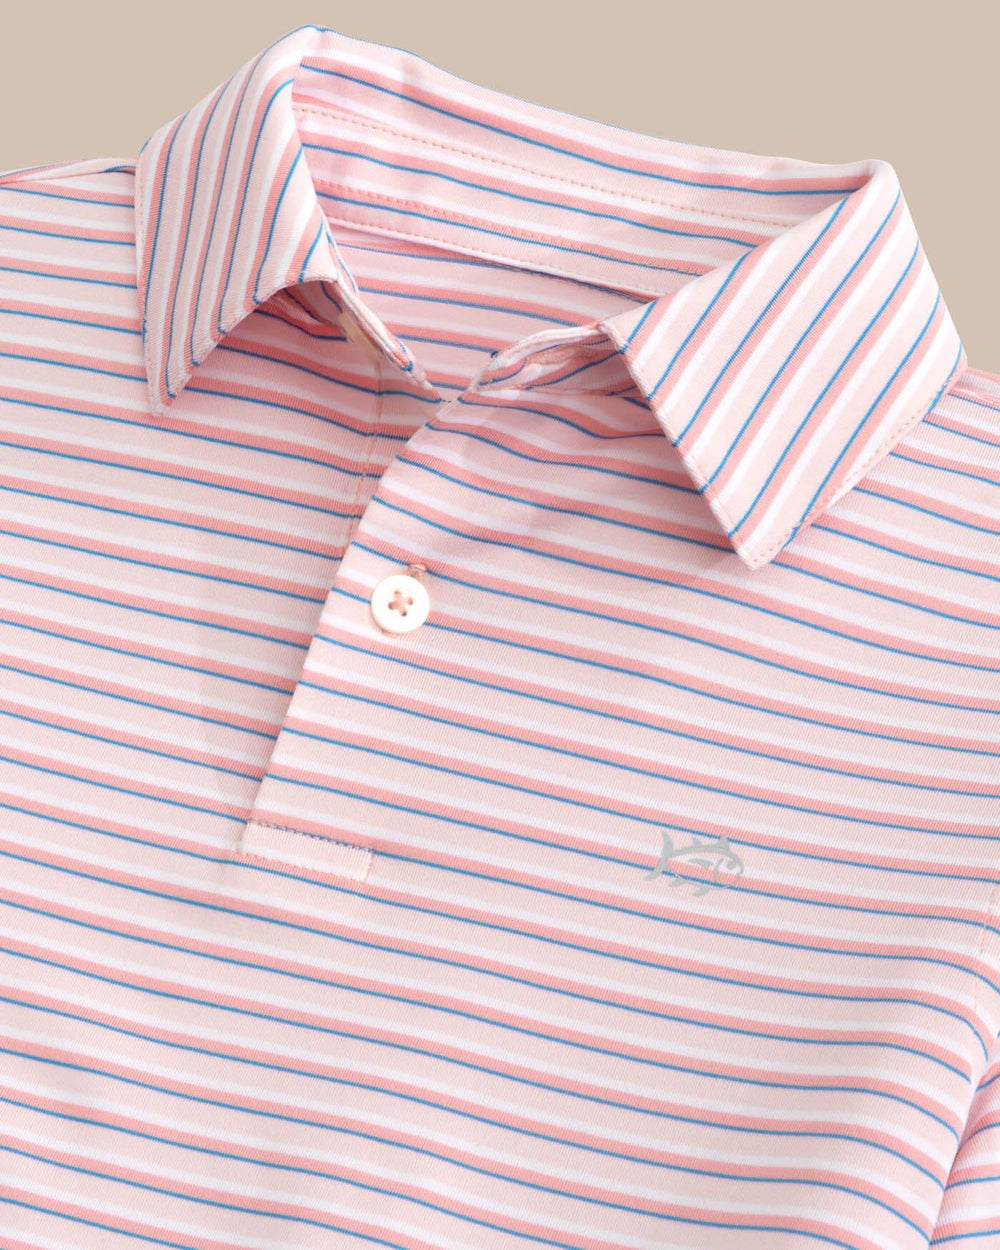 The detail view of the Southern Tide Boys Driver Carova Stripe Polo Shirt by Southern Tide - Light Pink